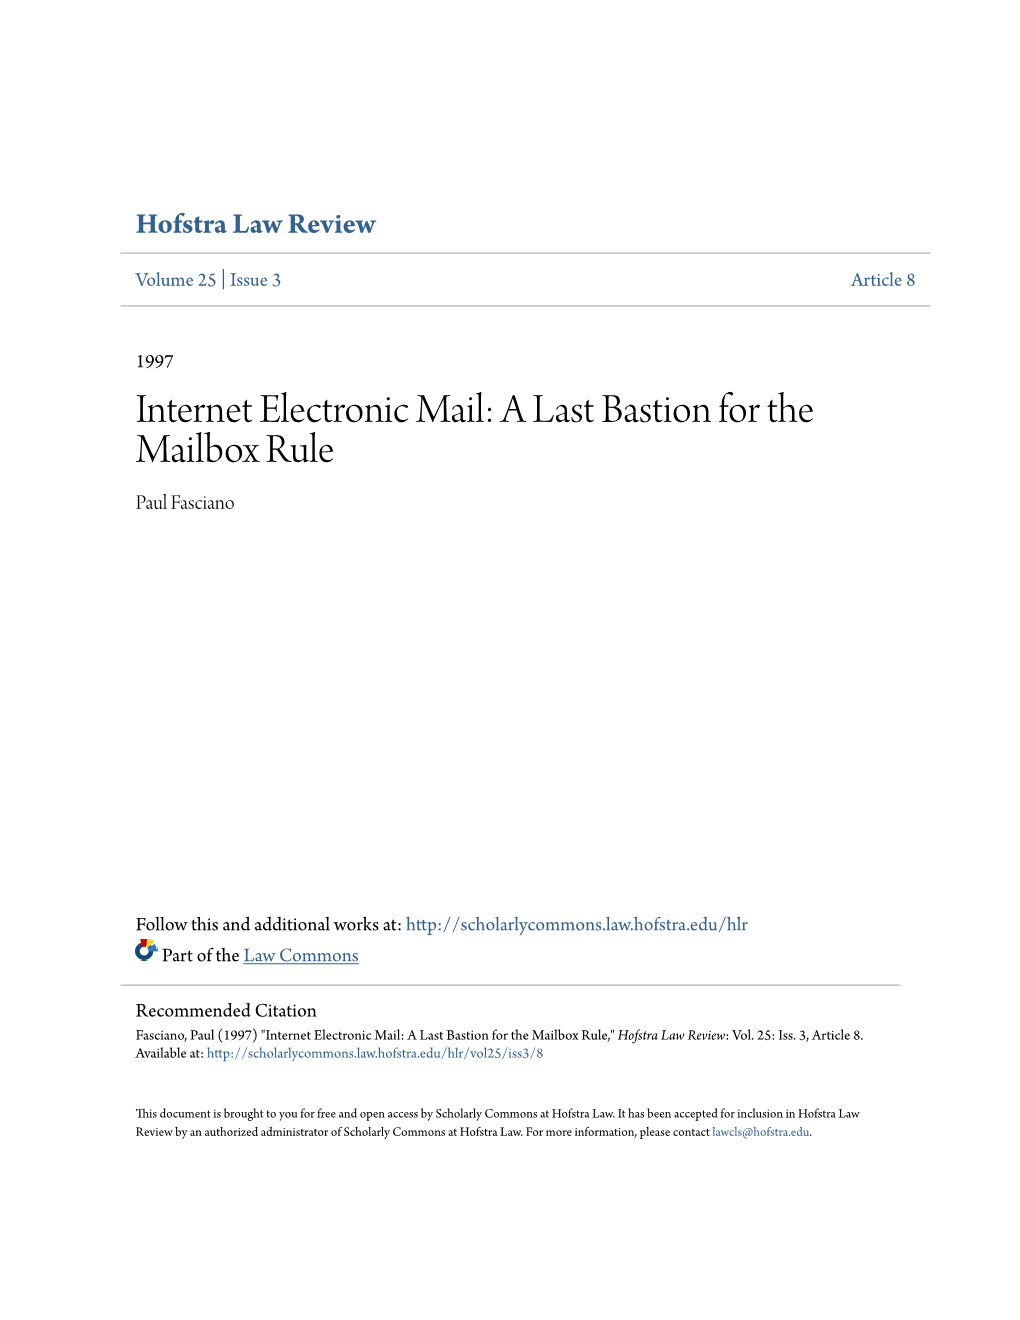 Internet Electronic Mail: a Last Bastion for the Mailbox Rule Paul Fasciano